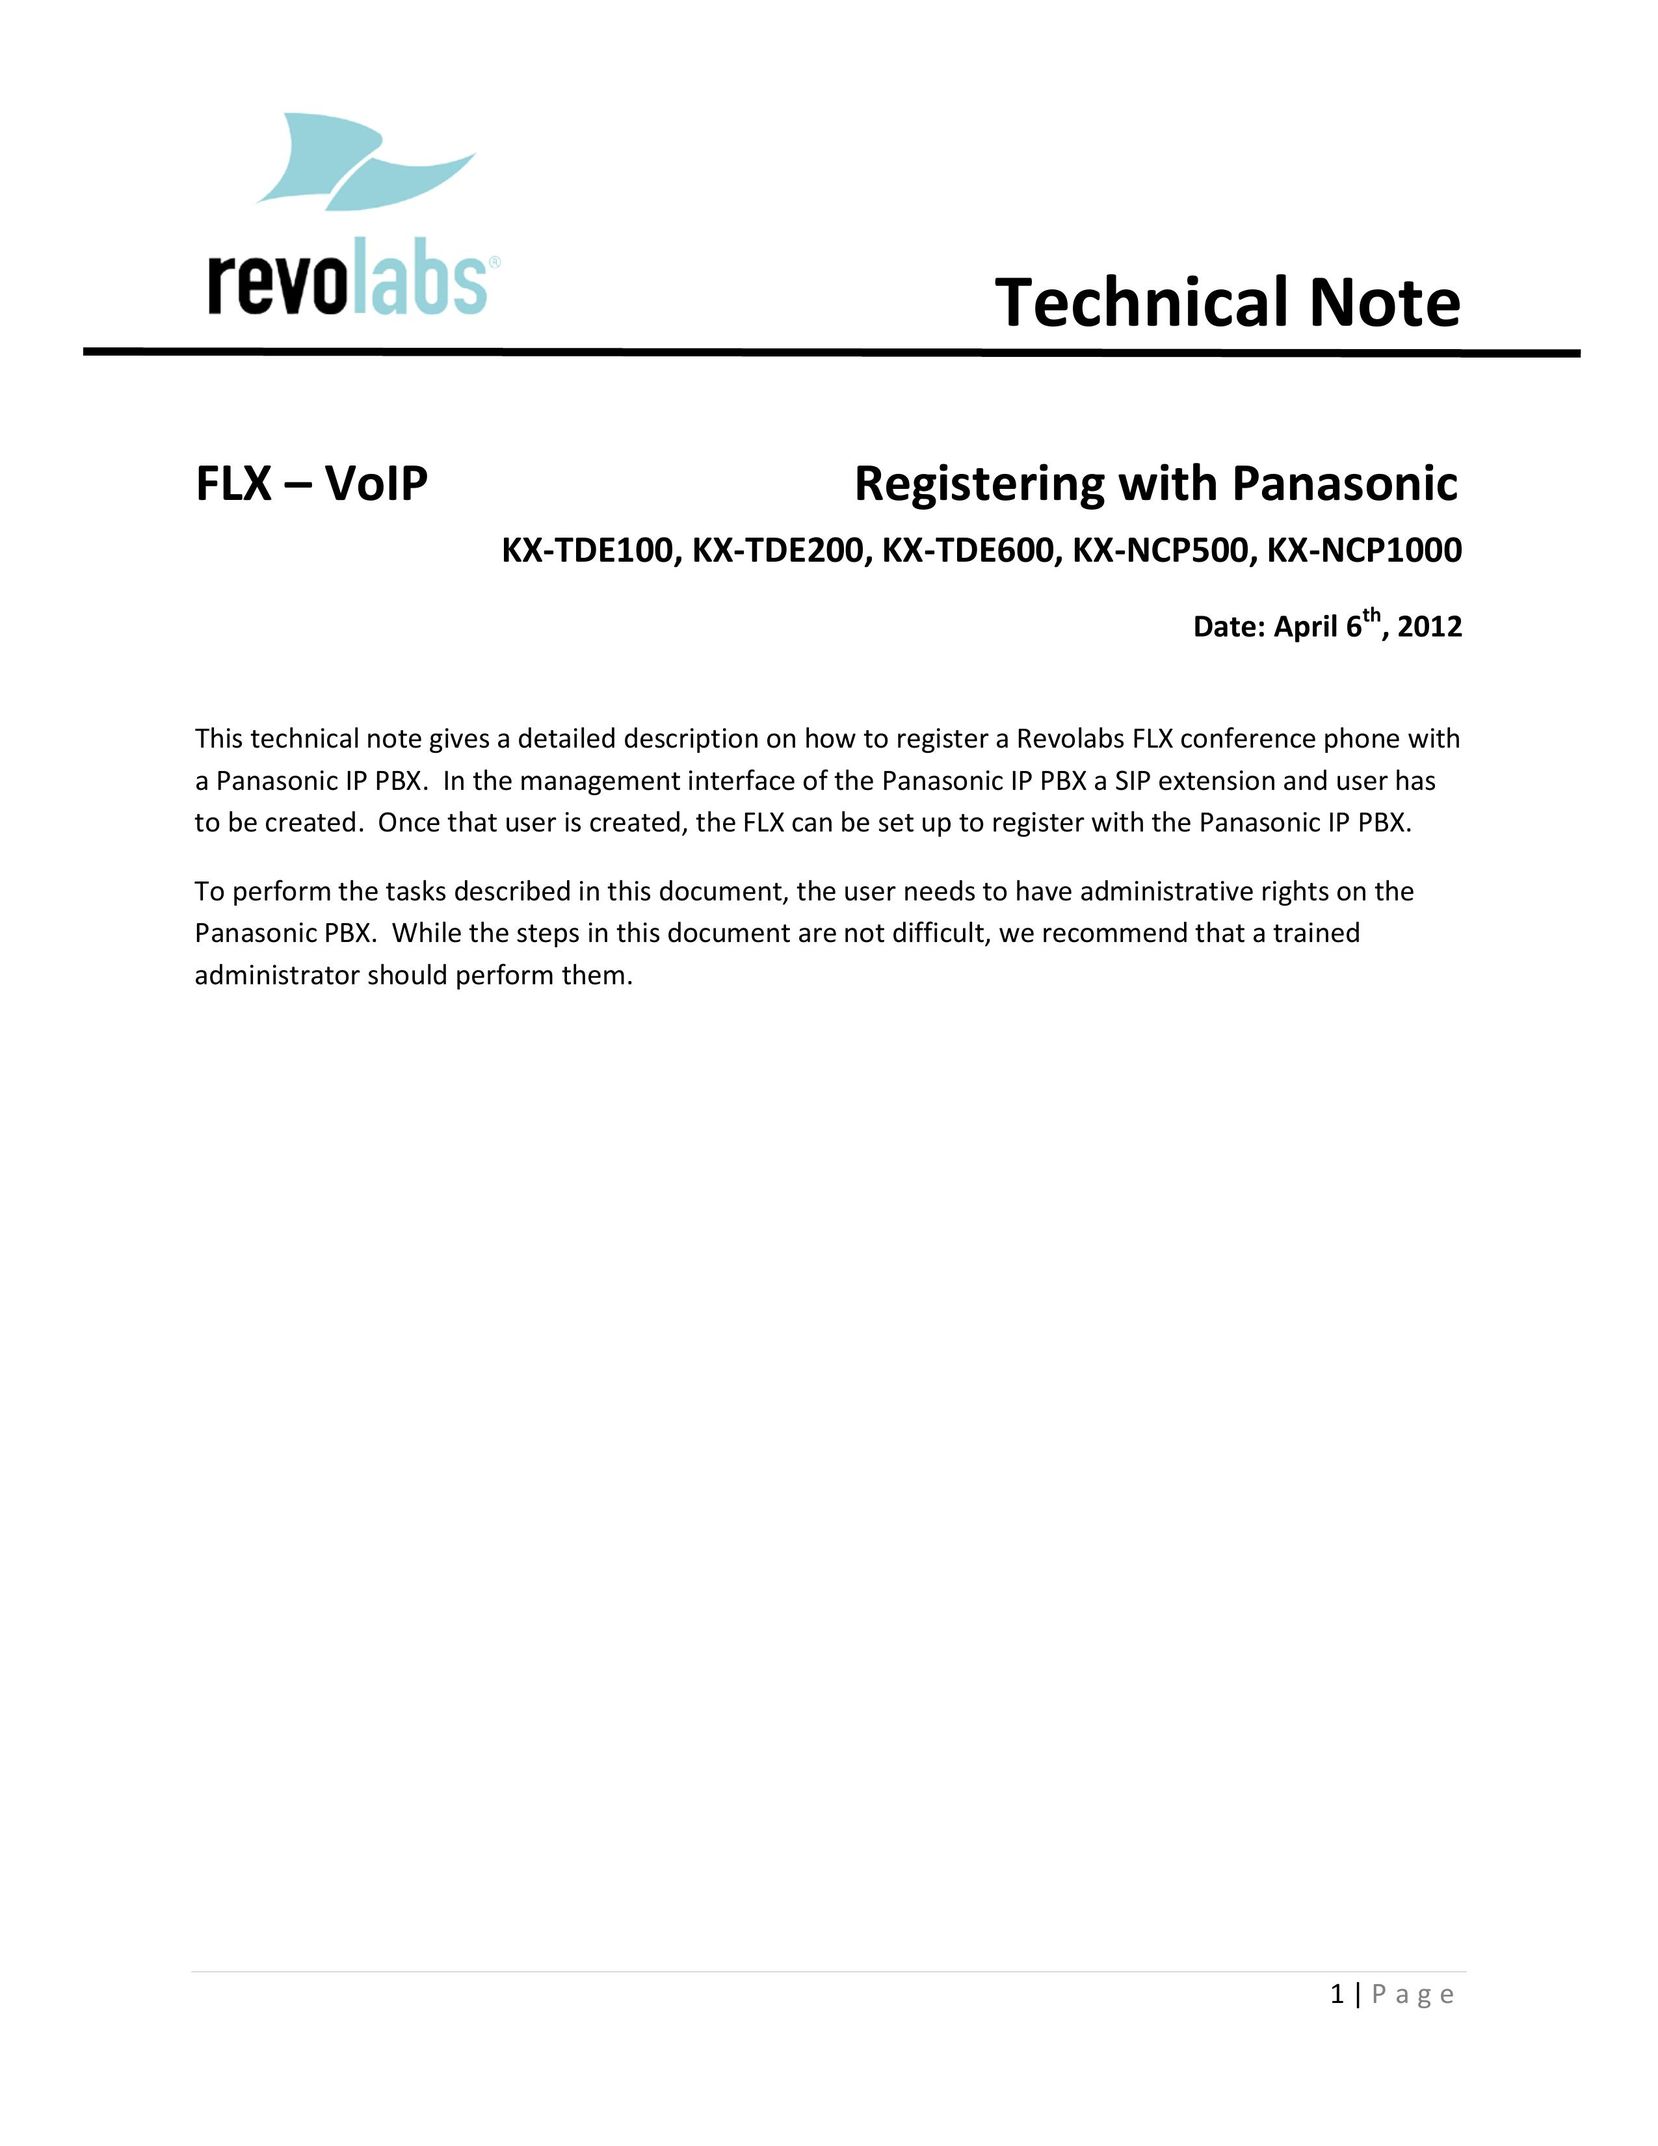 Revolabs KX-NCP1000 Amplified Phone User Manual